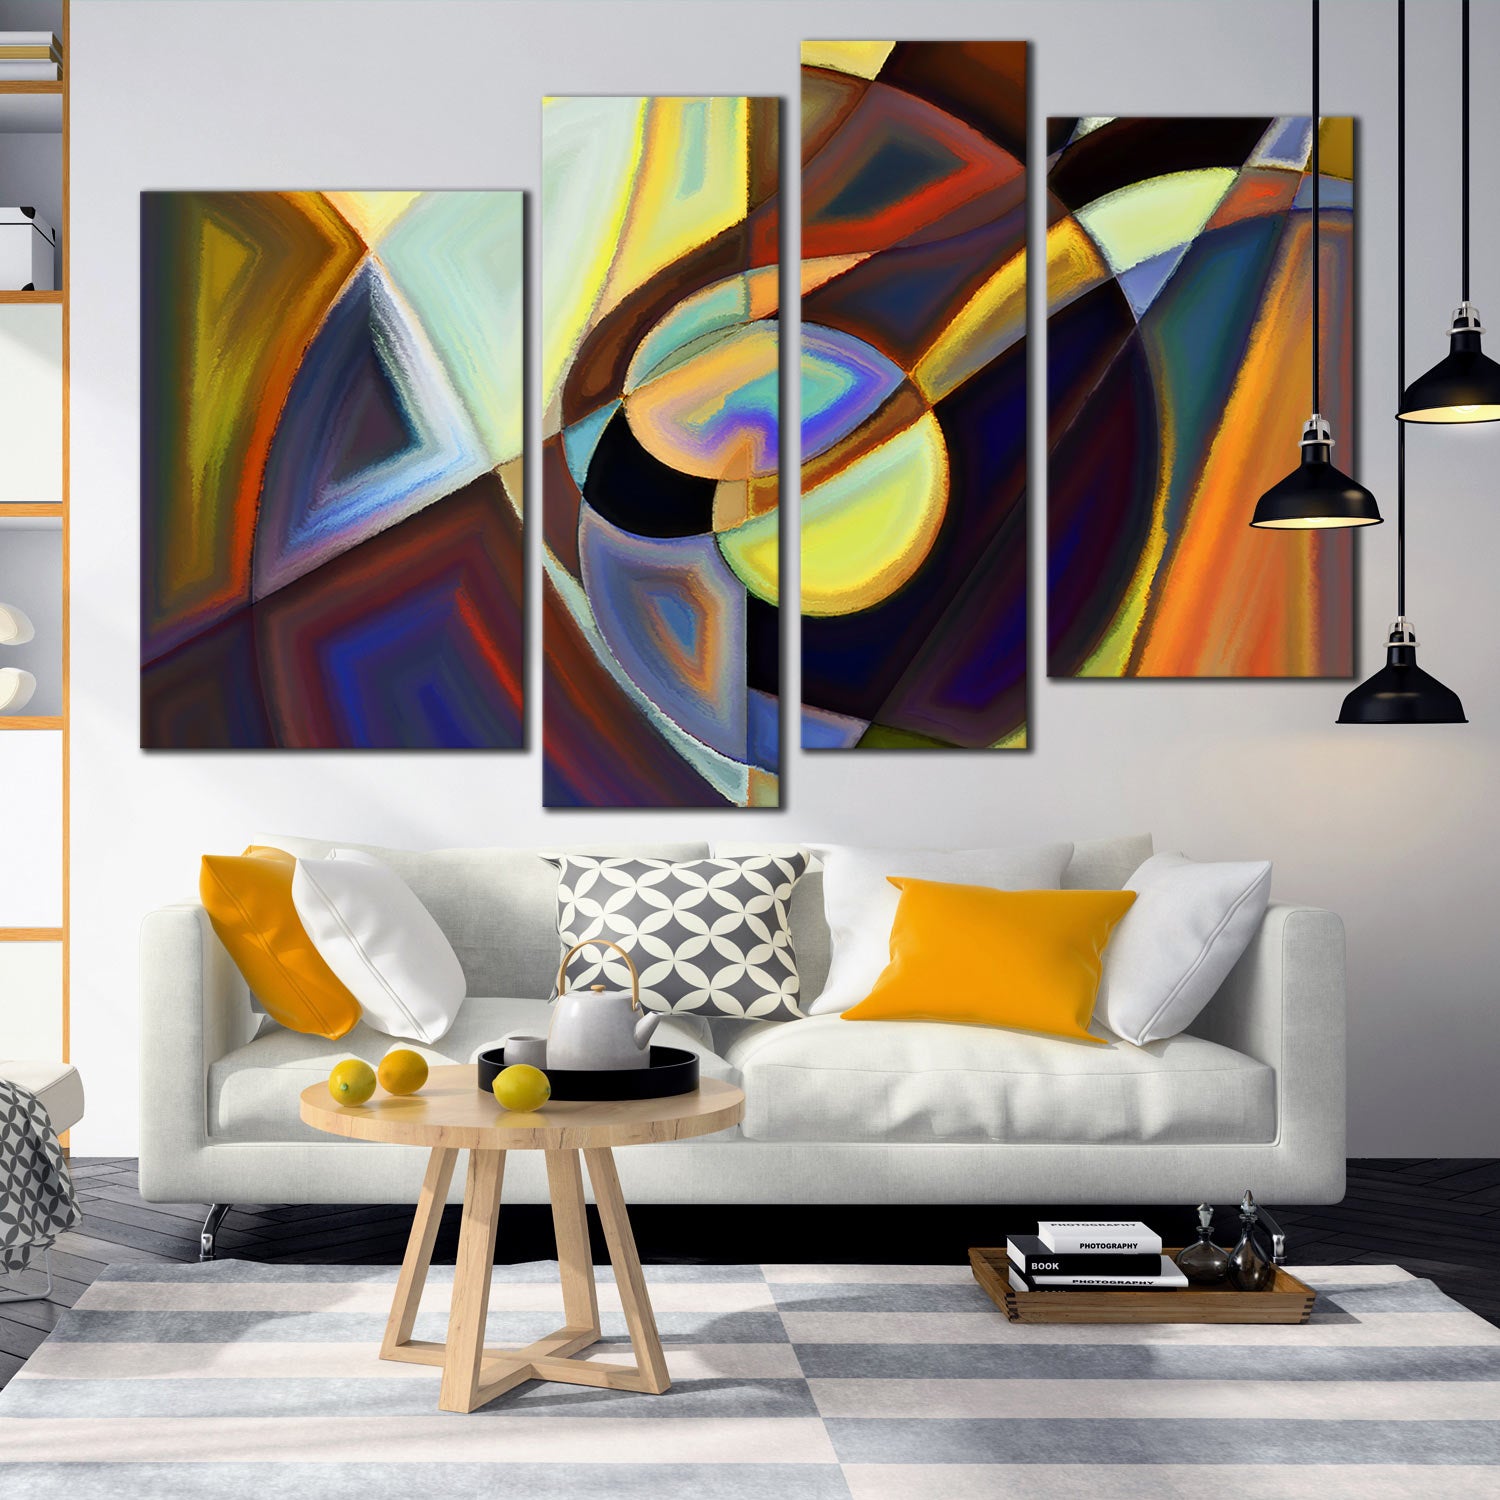 Abstract Shape Canvas Wall Art, Colorful Abstract Patterns 4 Piece Mul ...